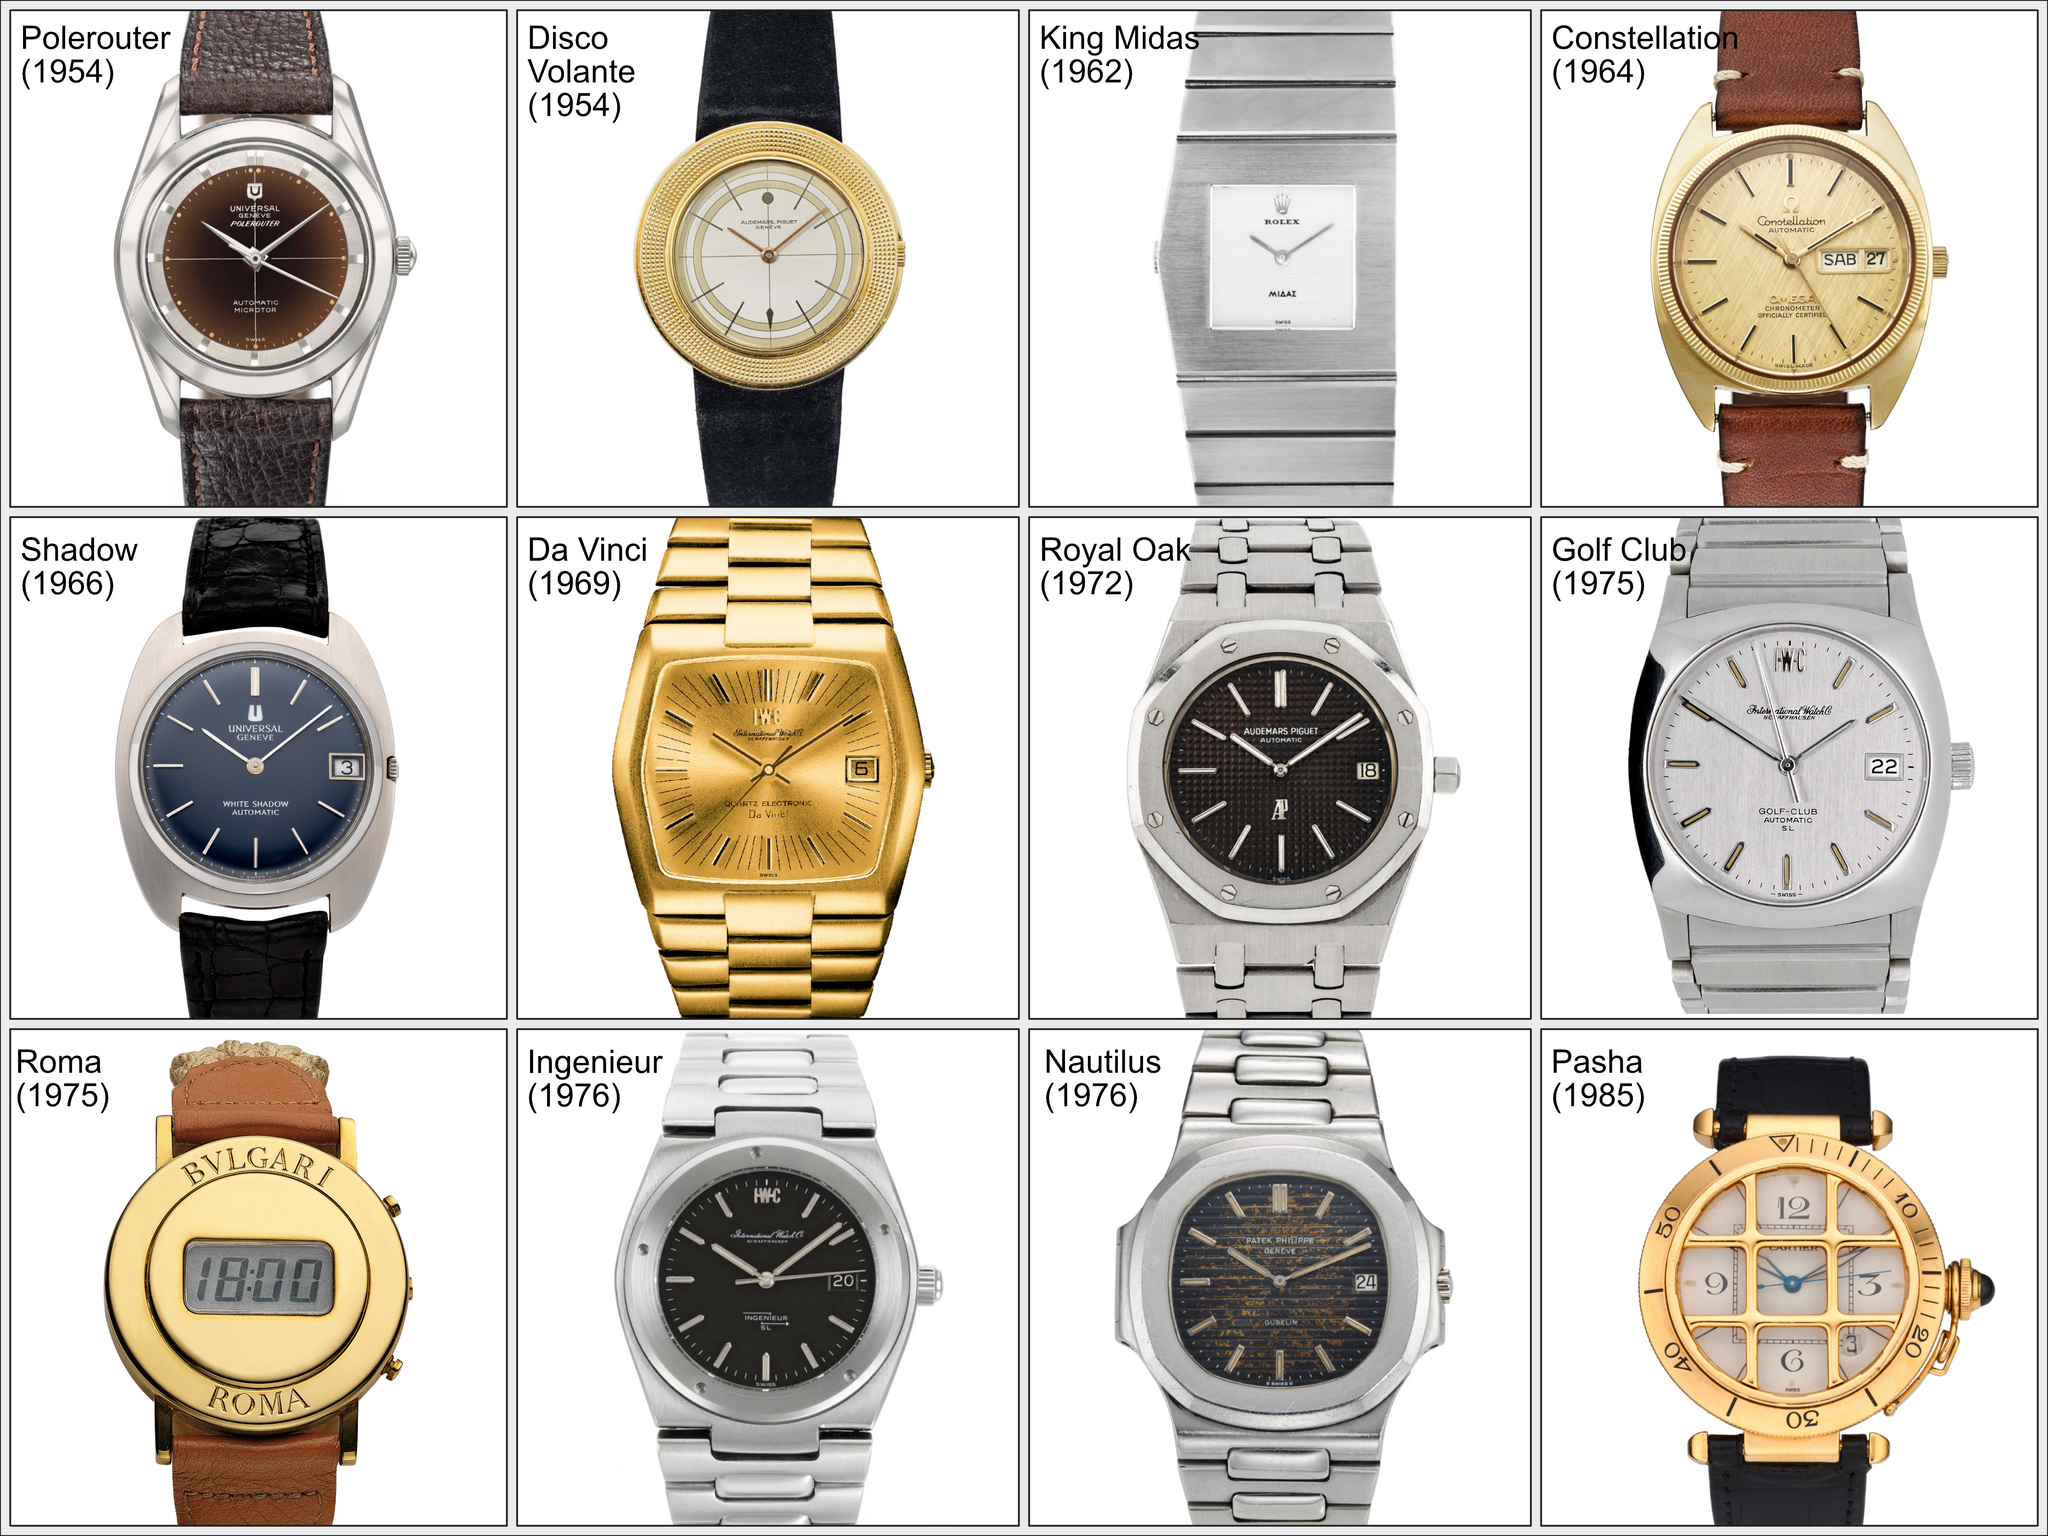 several Gerald Genta wristwatch designs from various watch manufacturers throughout the last Century